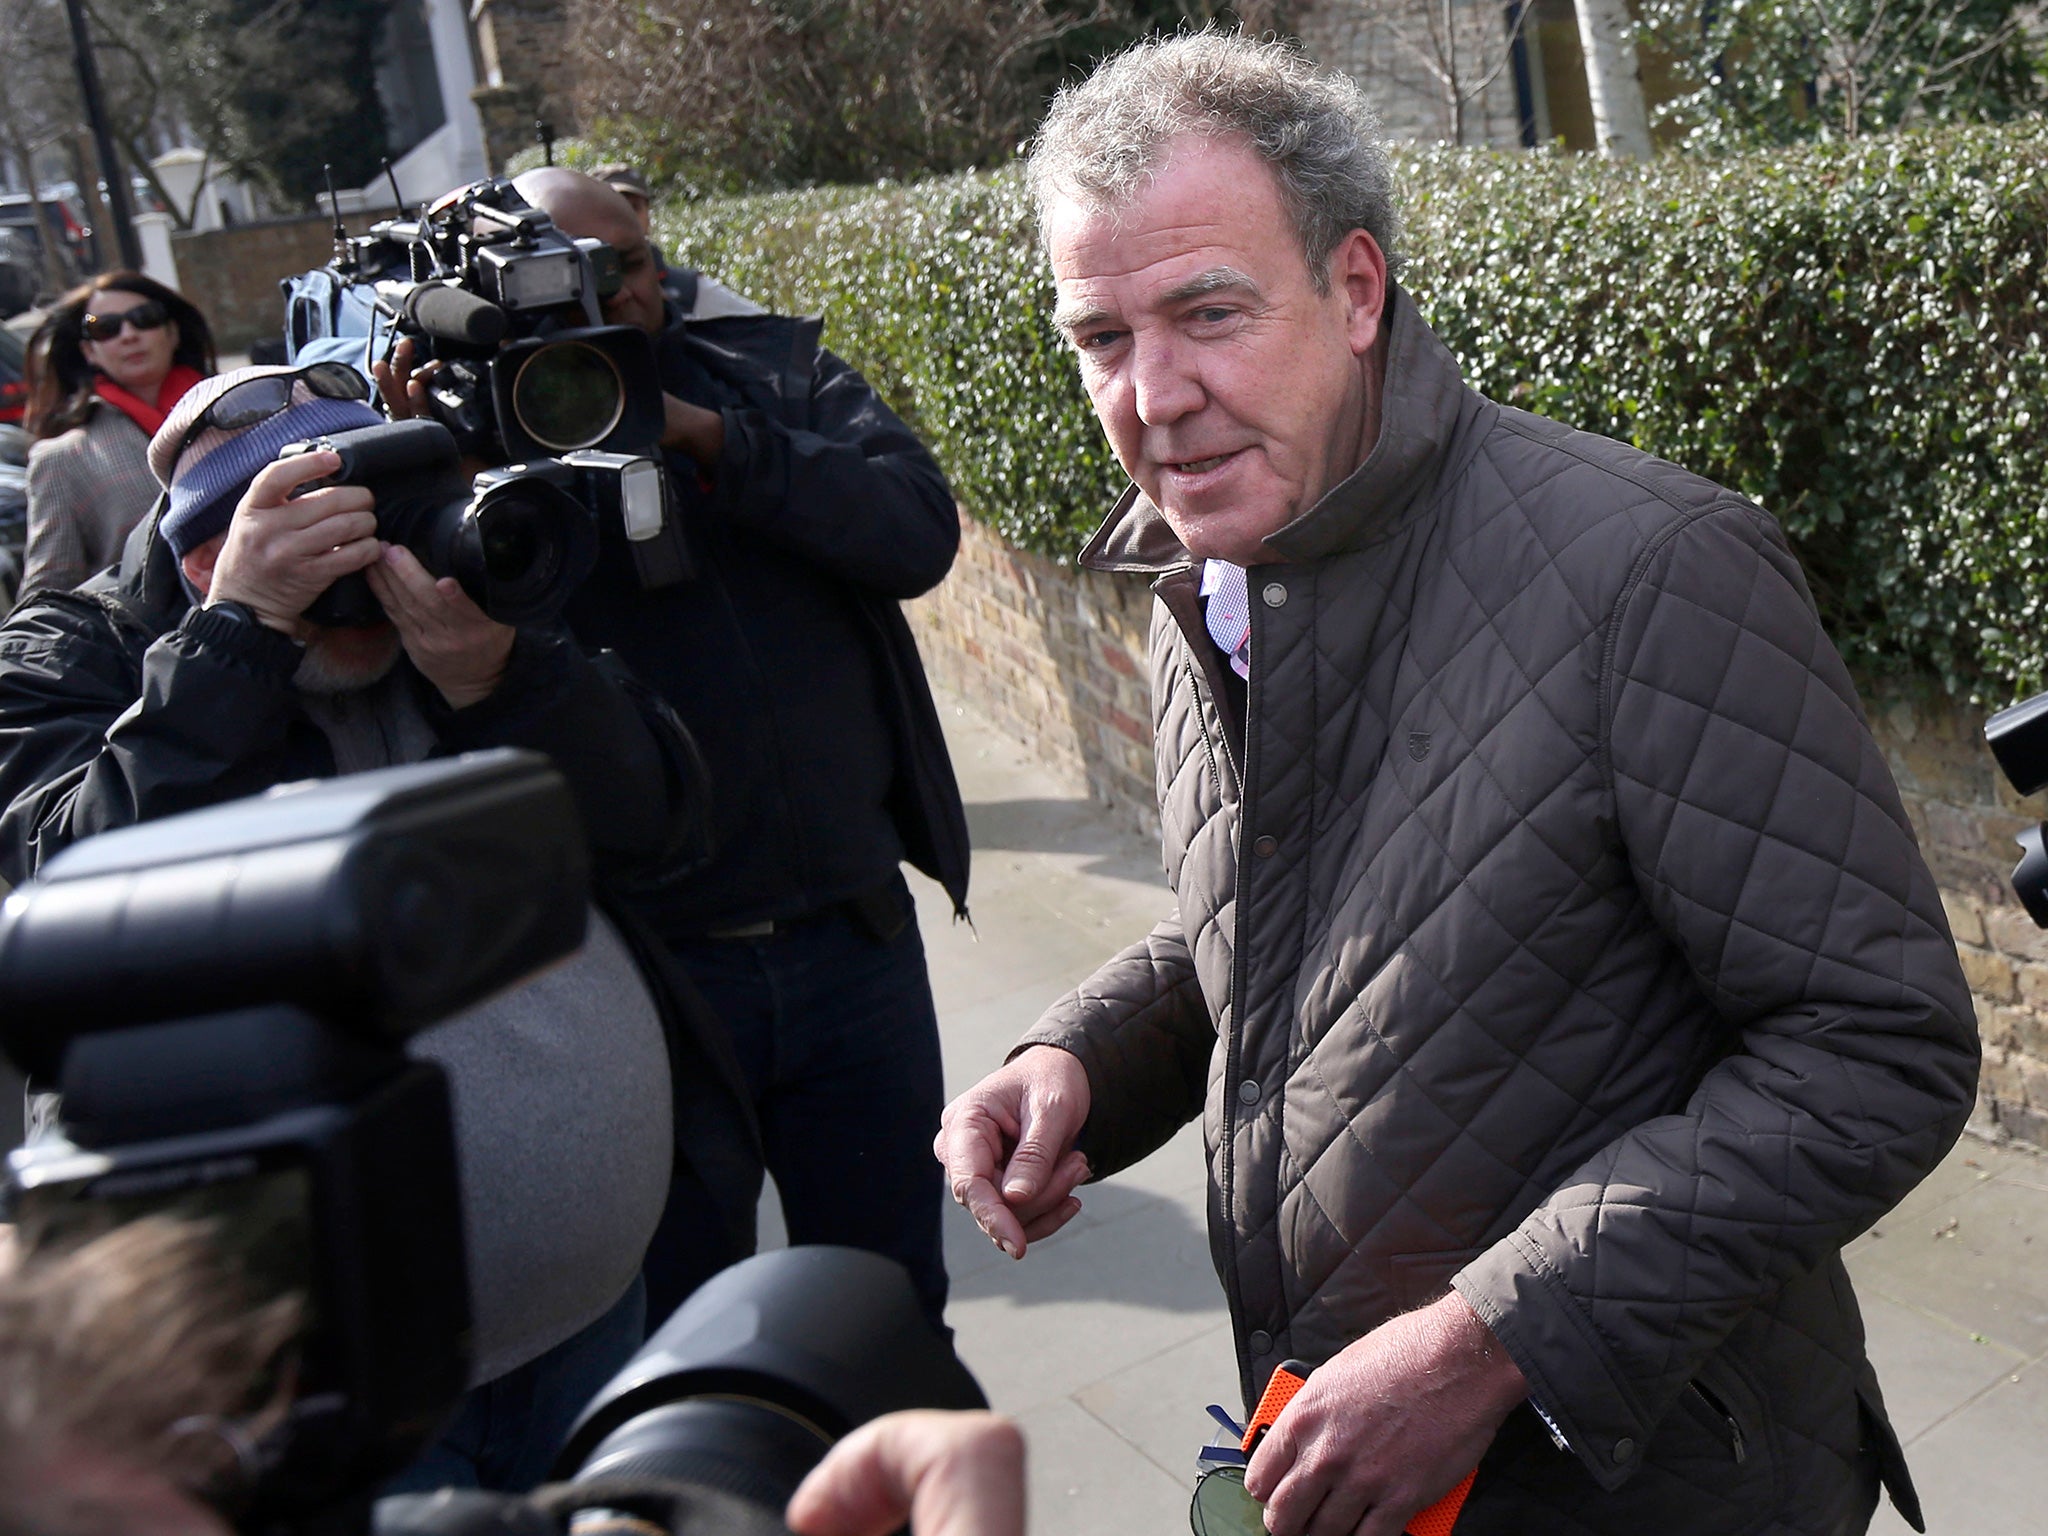 Clarkson told reporters he was 'just off to the job centre' when asked about the 'fracas' with a BBC producer